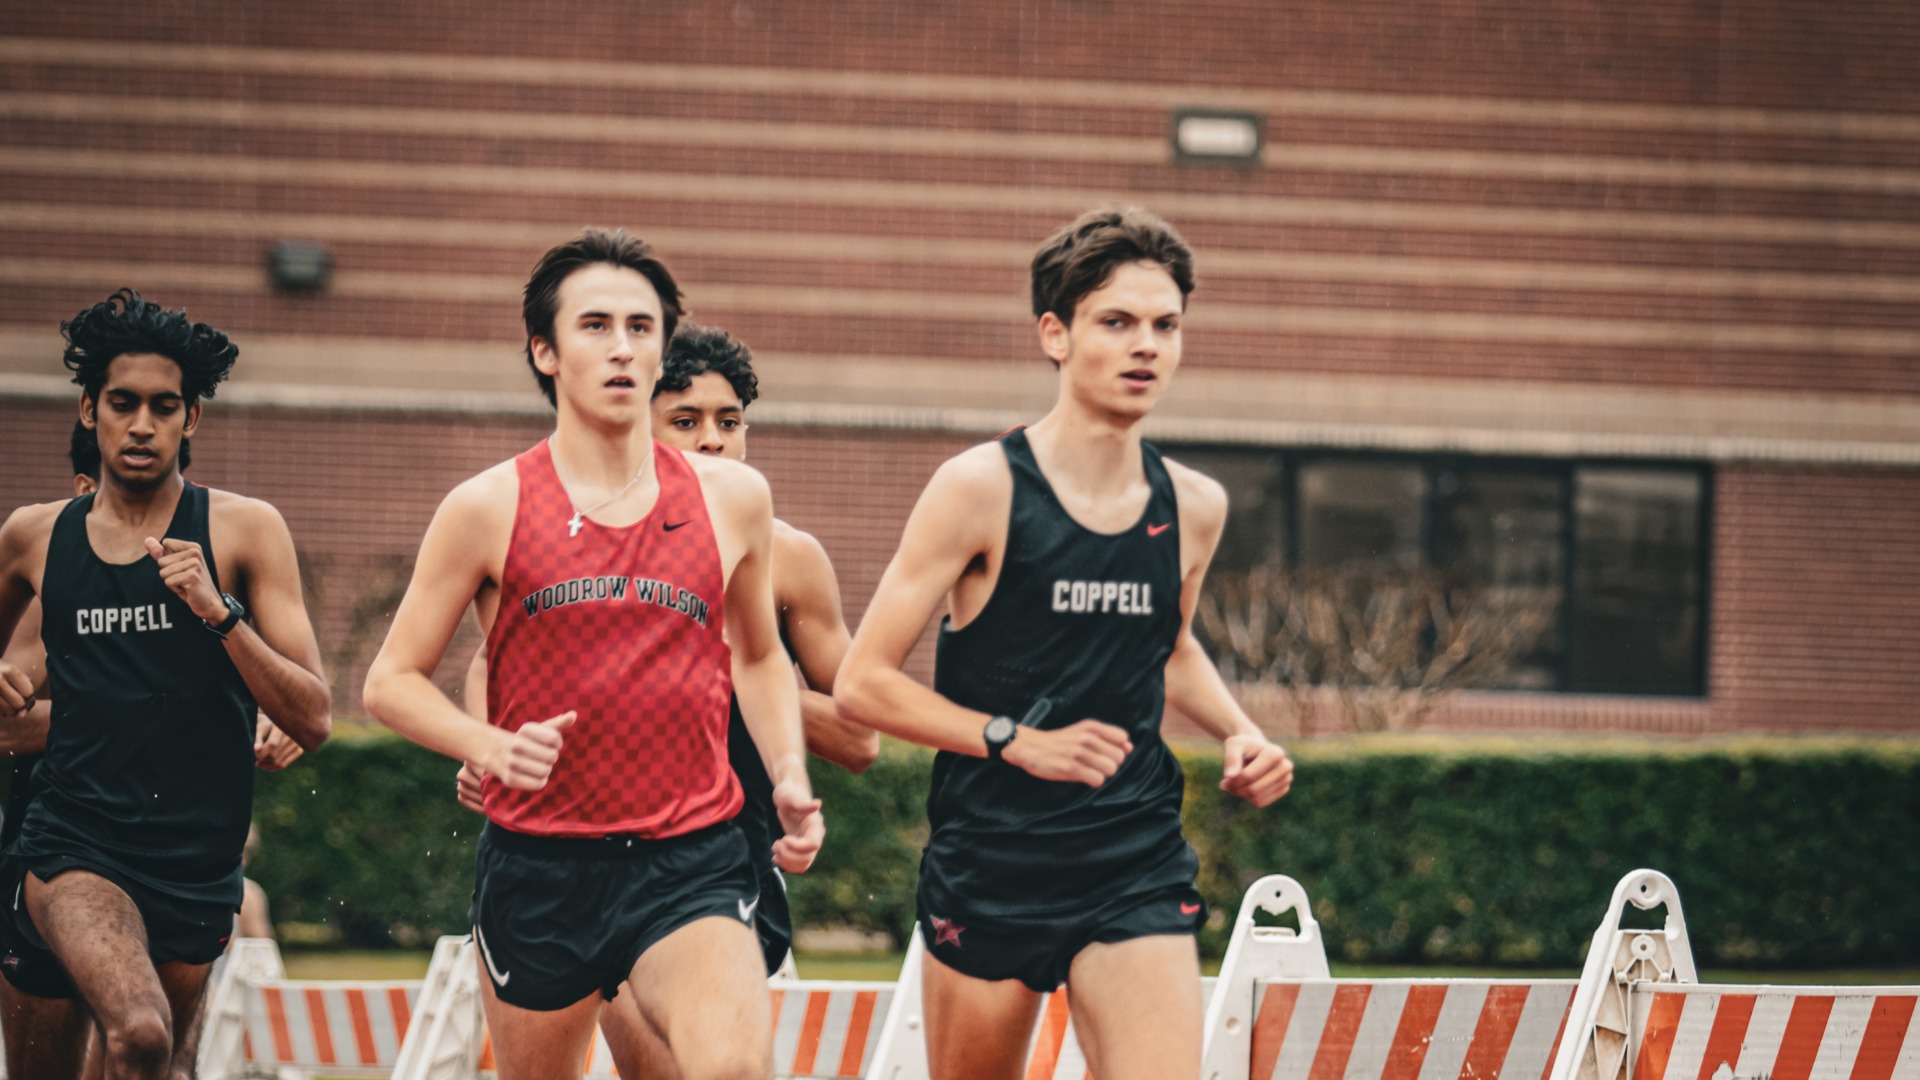 Coppell High SchoolSlide 7 - BOYS TRACK HEADED TO REGIONALS